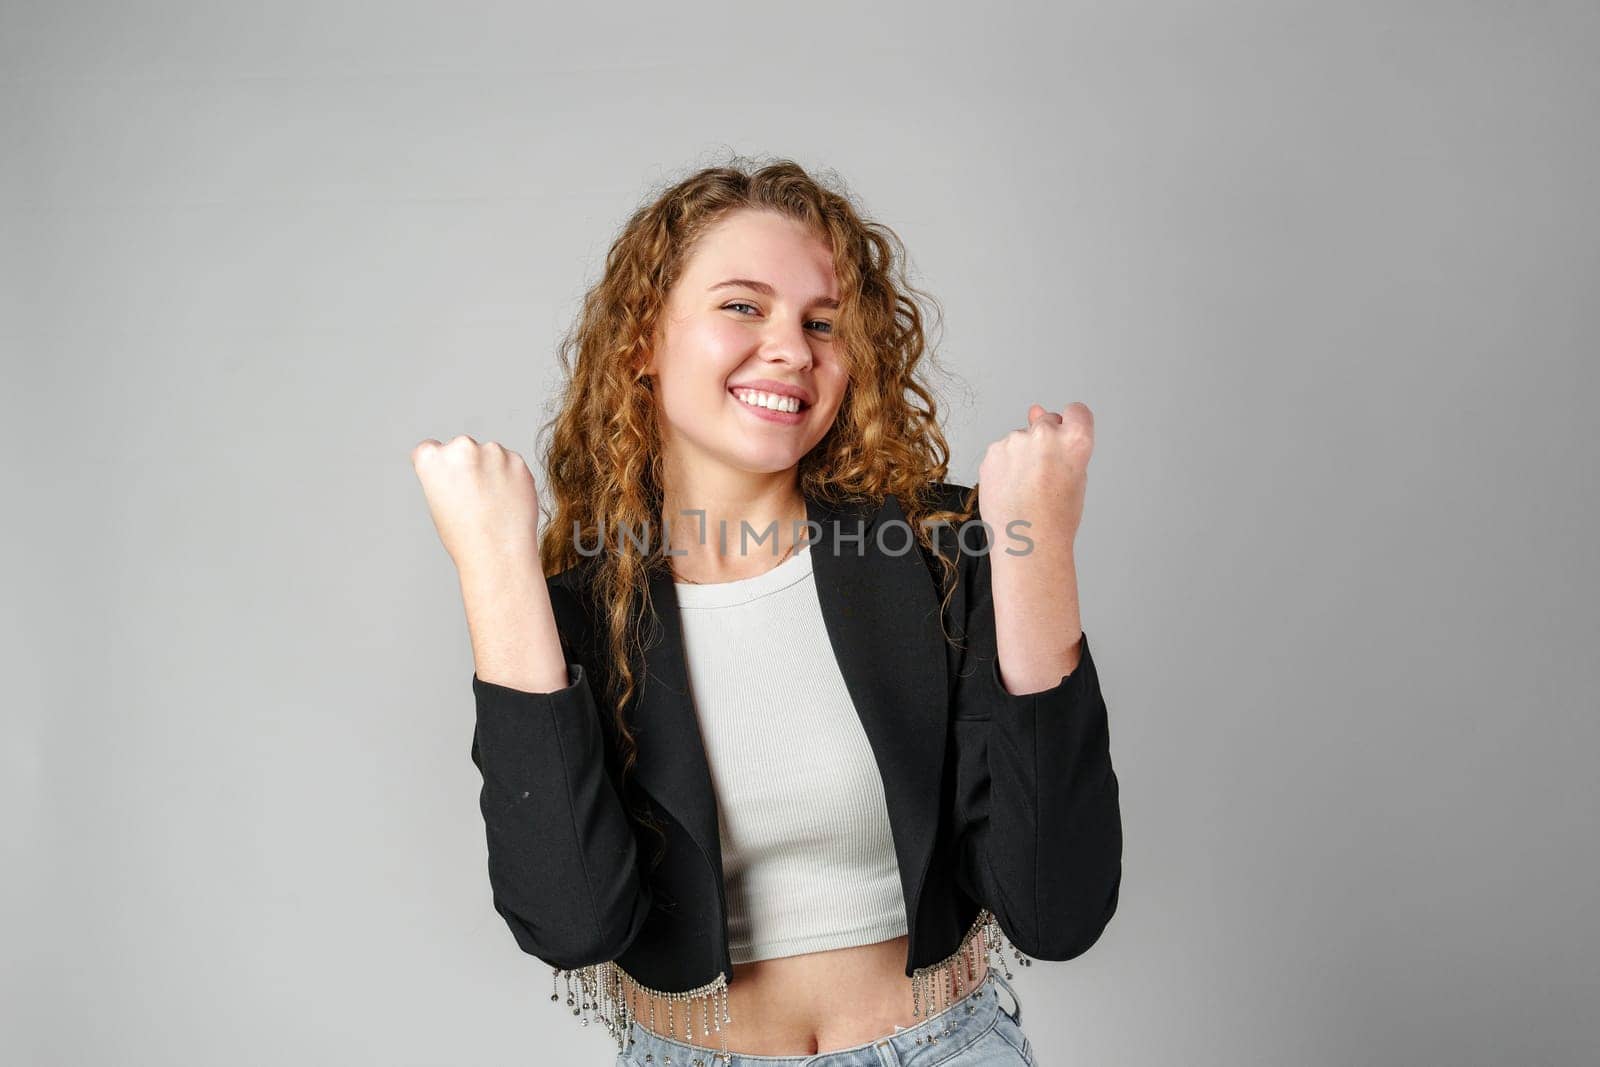 Excited Young Woman Celebrates Success With Raised Fists Against a Gray Background by Fabrikasimf